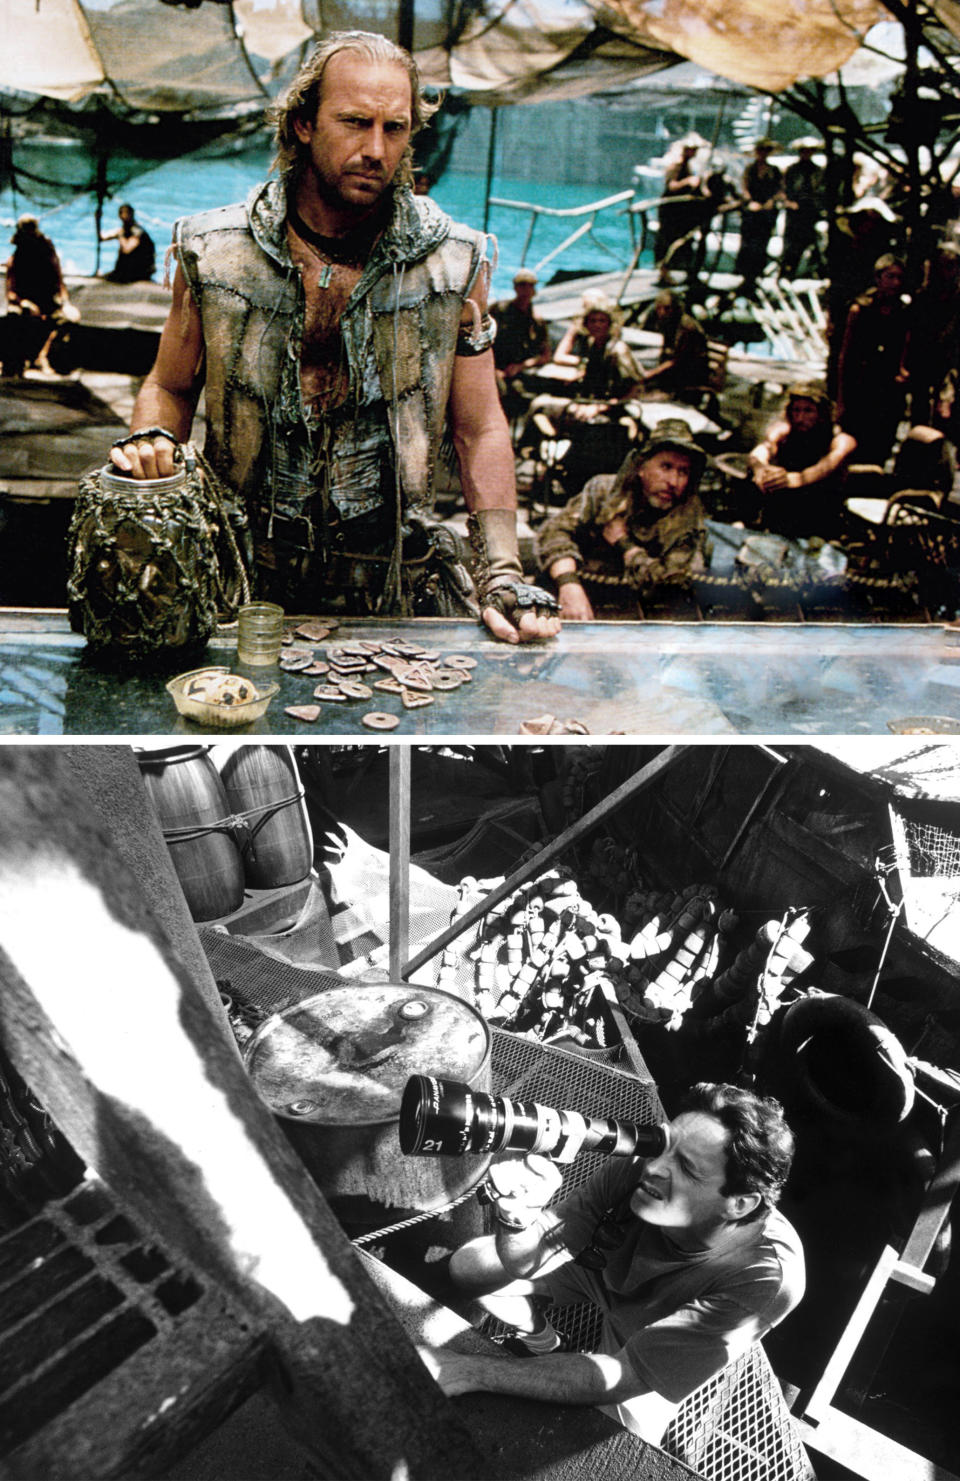 Waterworld, which starred Kevin Costner, was expected to be a box office smash but instead it went down in history as one of the biggest flops. The superexpensive movie, which ended up having a budget of $170 million, was plagued with disaster. It started with the destruction of its set due to a hurricane and the set had to be rebuilt. On top of that, Kevin Costner and director Kevin Reynolds battled over creative control and Kevin Reynolds ultimately departed the production before editing was complete. When Kevin Costner took over to finish editing the film, massive scenes were reportedly removed, which only made how much was spent on the film all the more devastating. In the end, Waterworld only grossed $88 million in 1995.